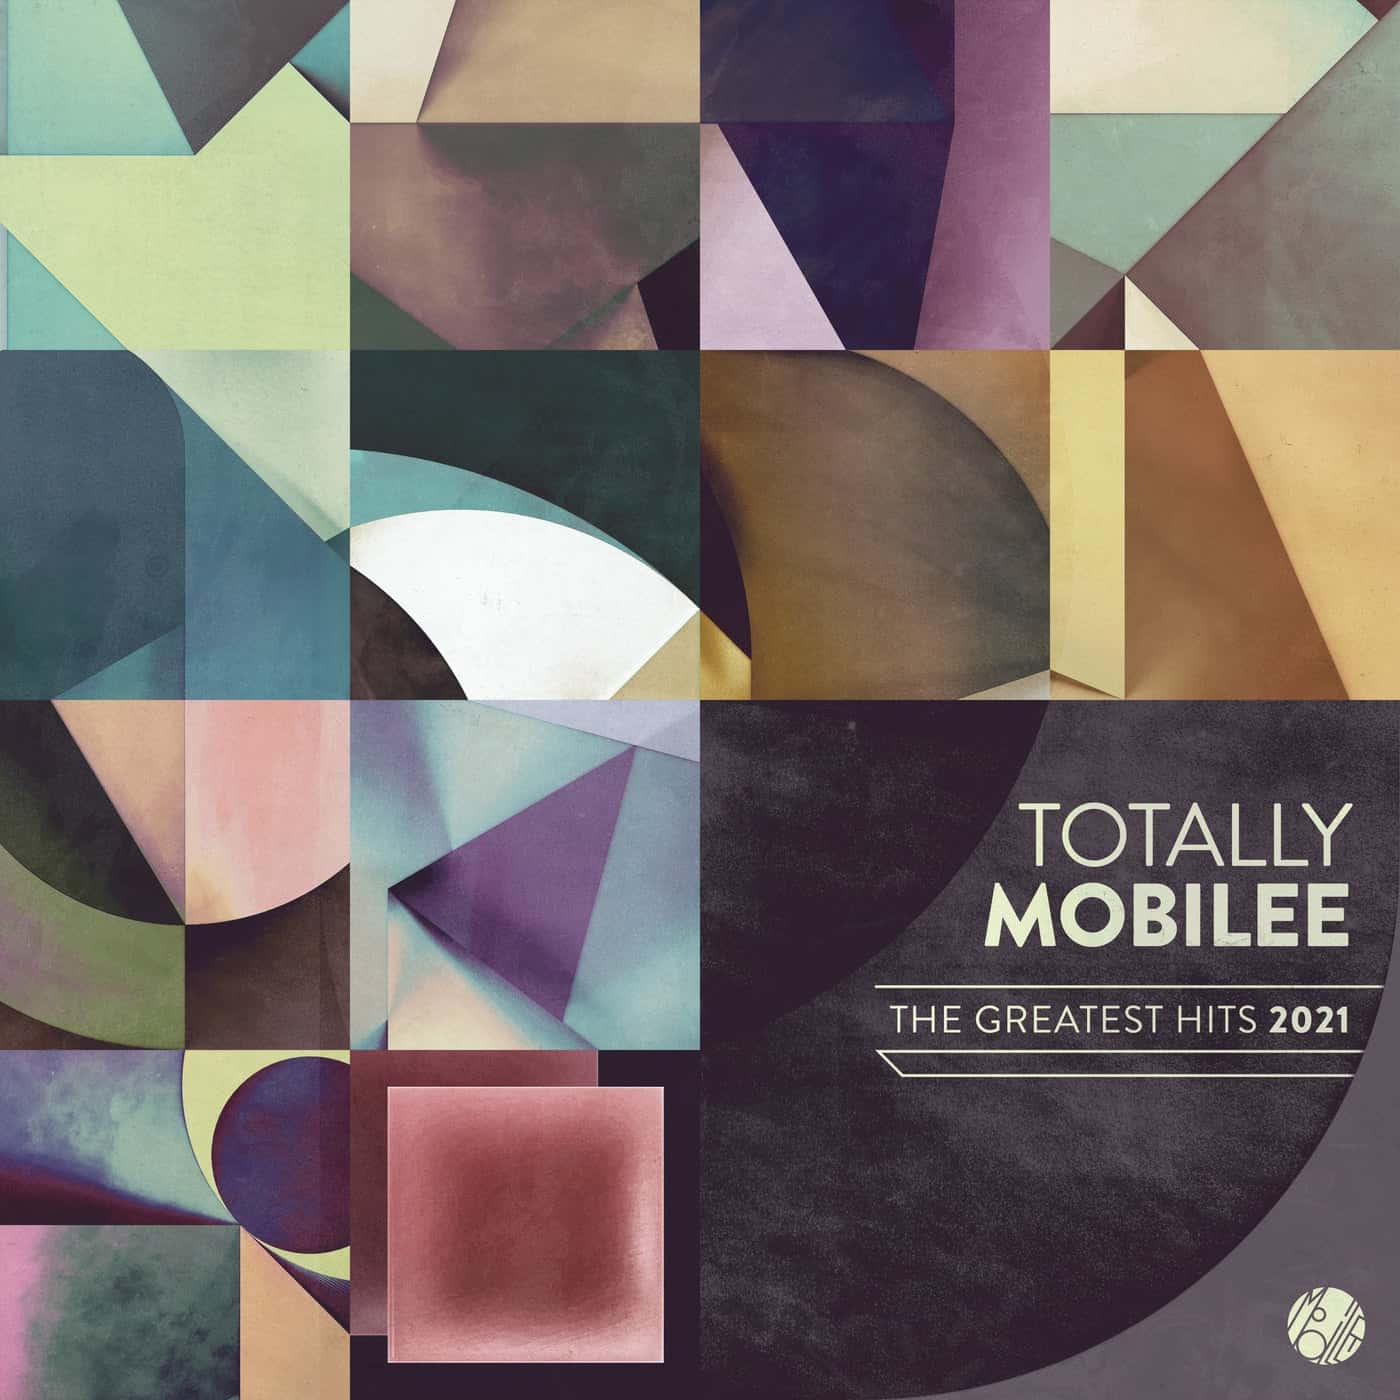 Download Totally Mobilee - Greatest Hits 2021 on Electrobuzz